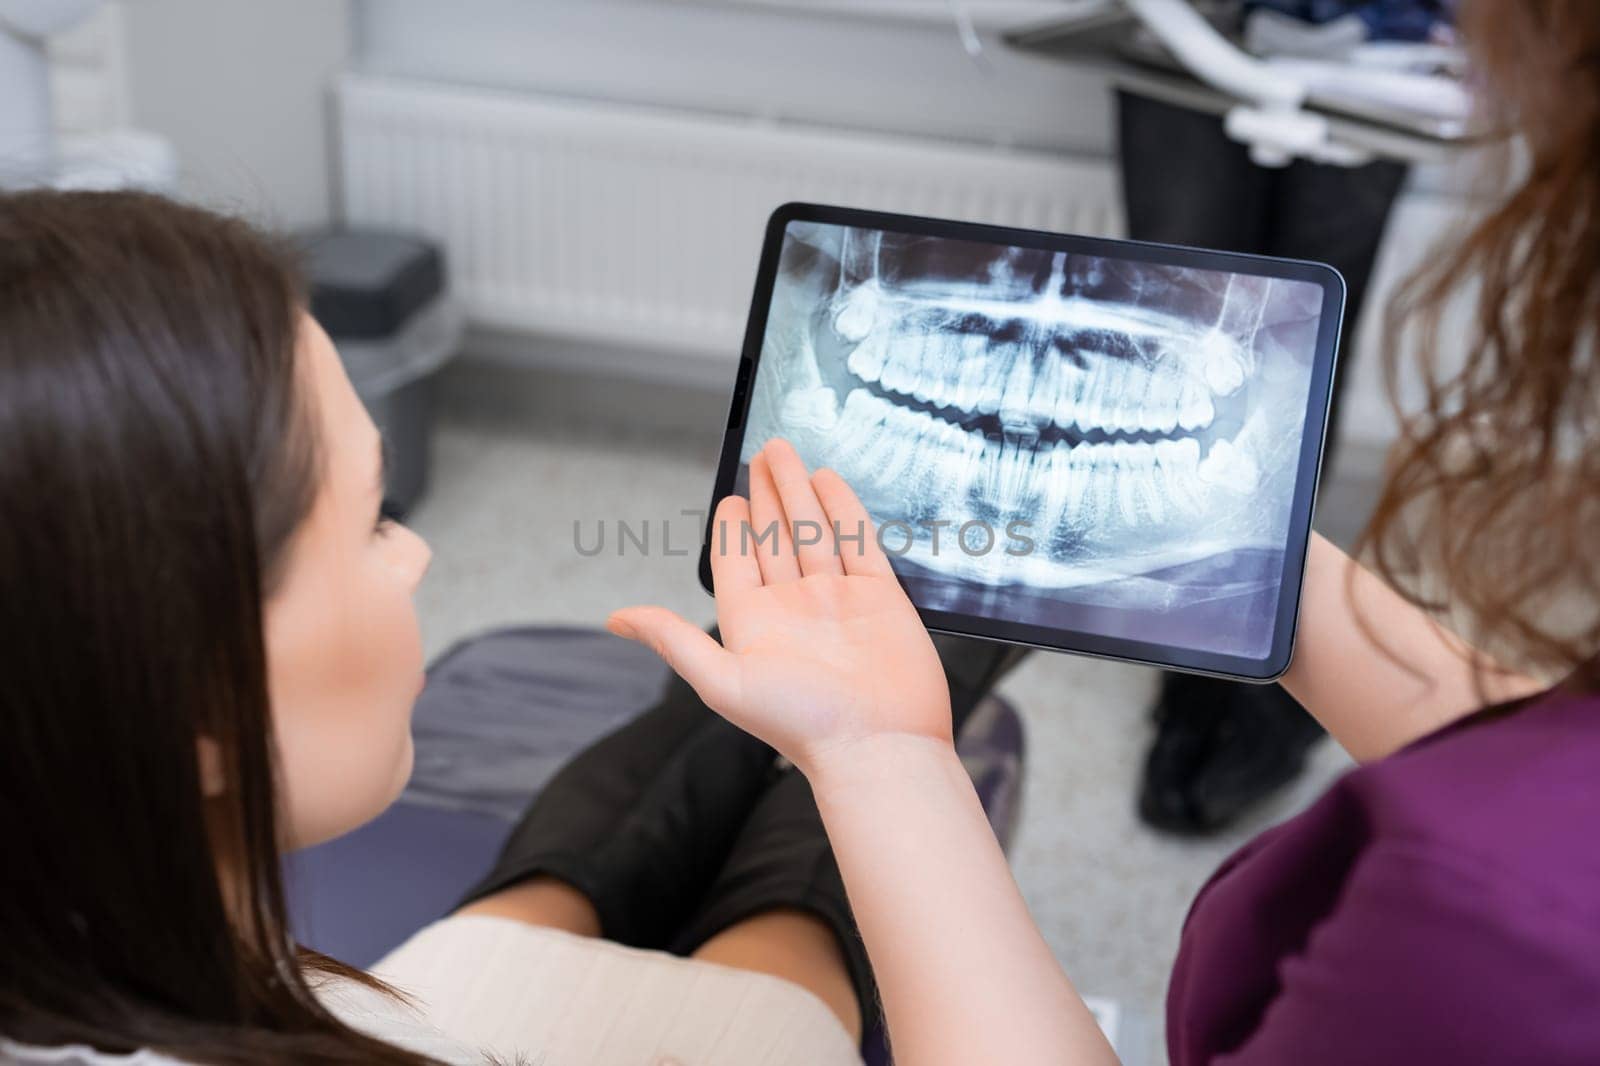 Utilizing a tablet to showcase the X ray image, the female dentist discusses treatment strategies with the patien